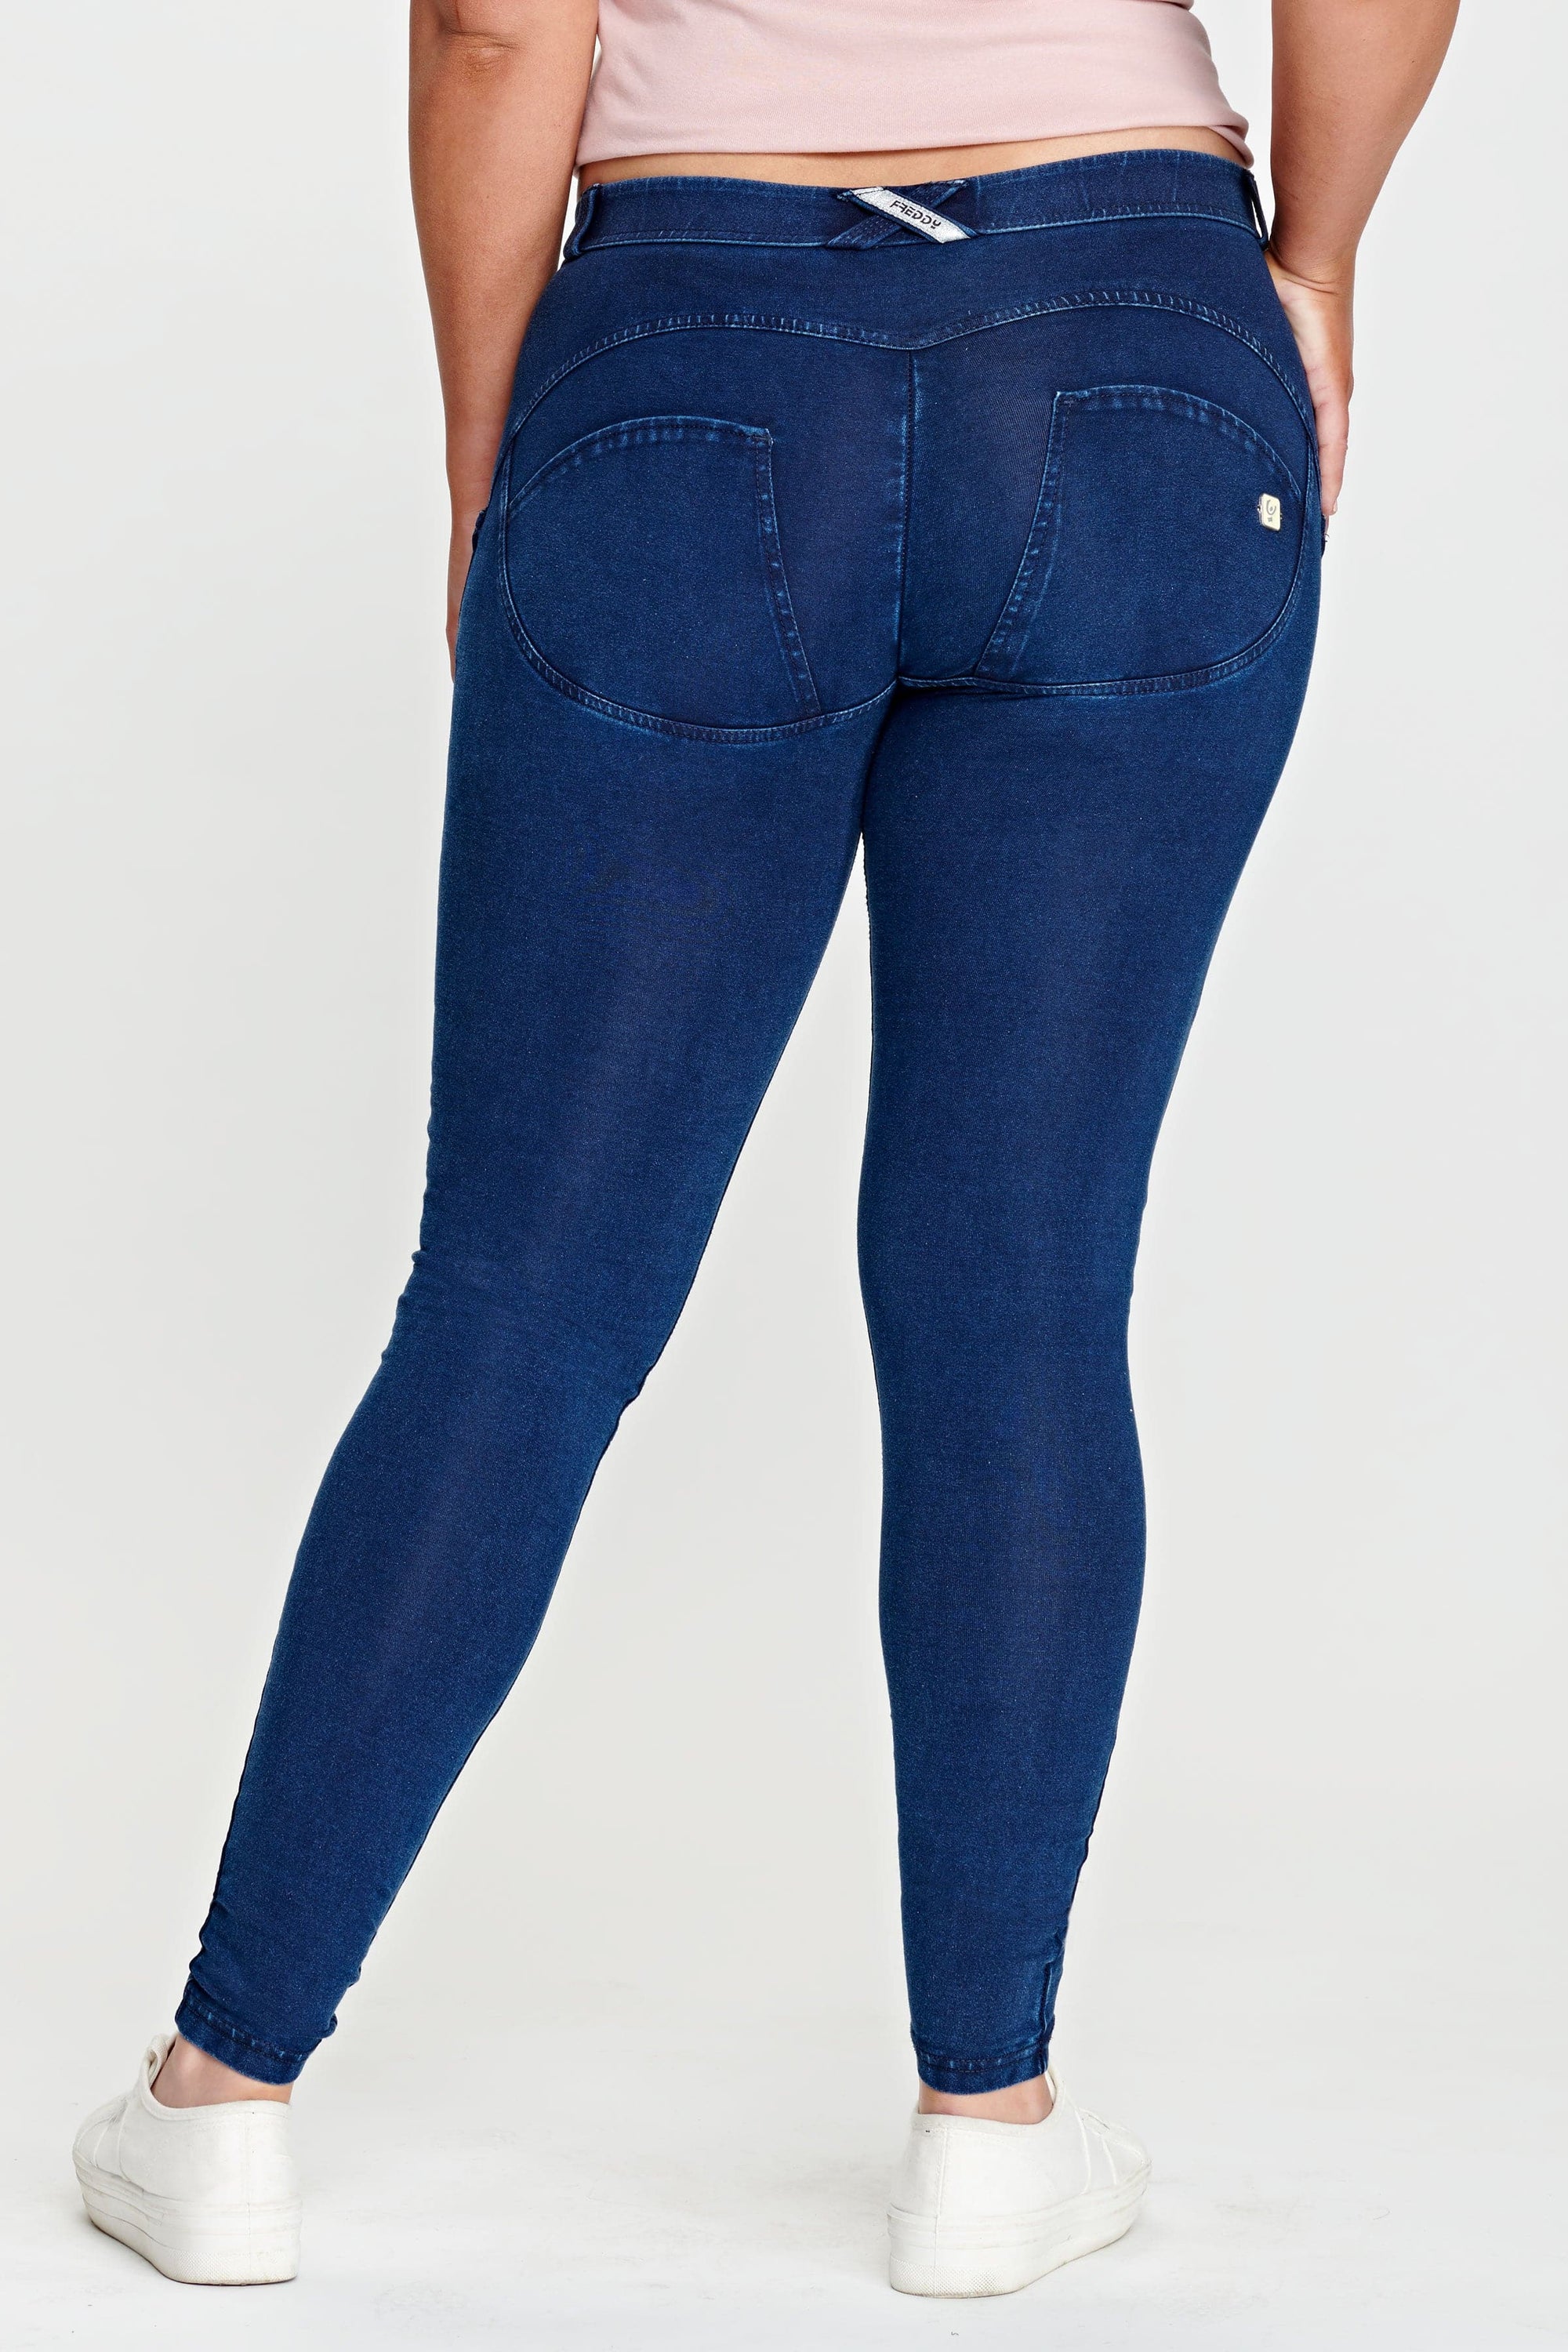 Freddy WR.UP Dark Blue Jeans + Blue Stitching, mid rise, Full Length | Jeggings